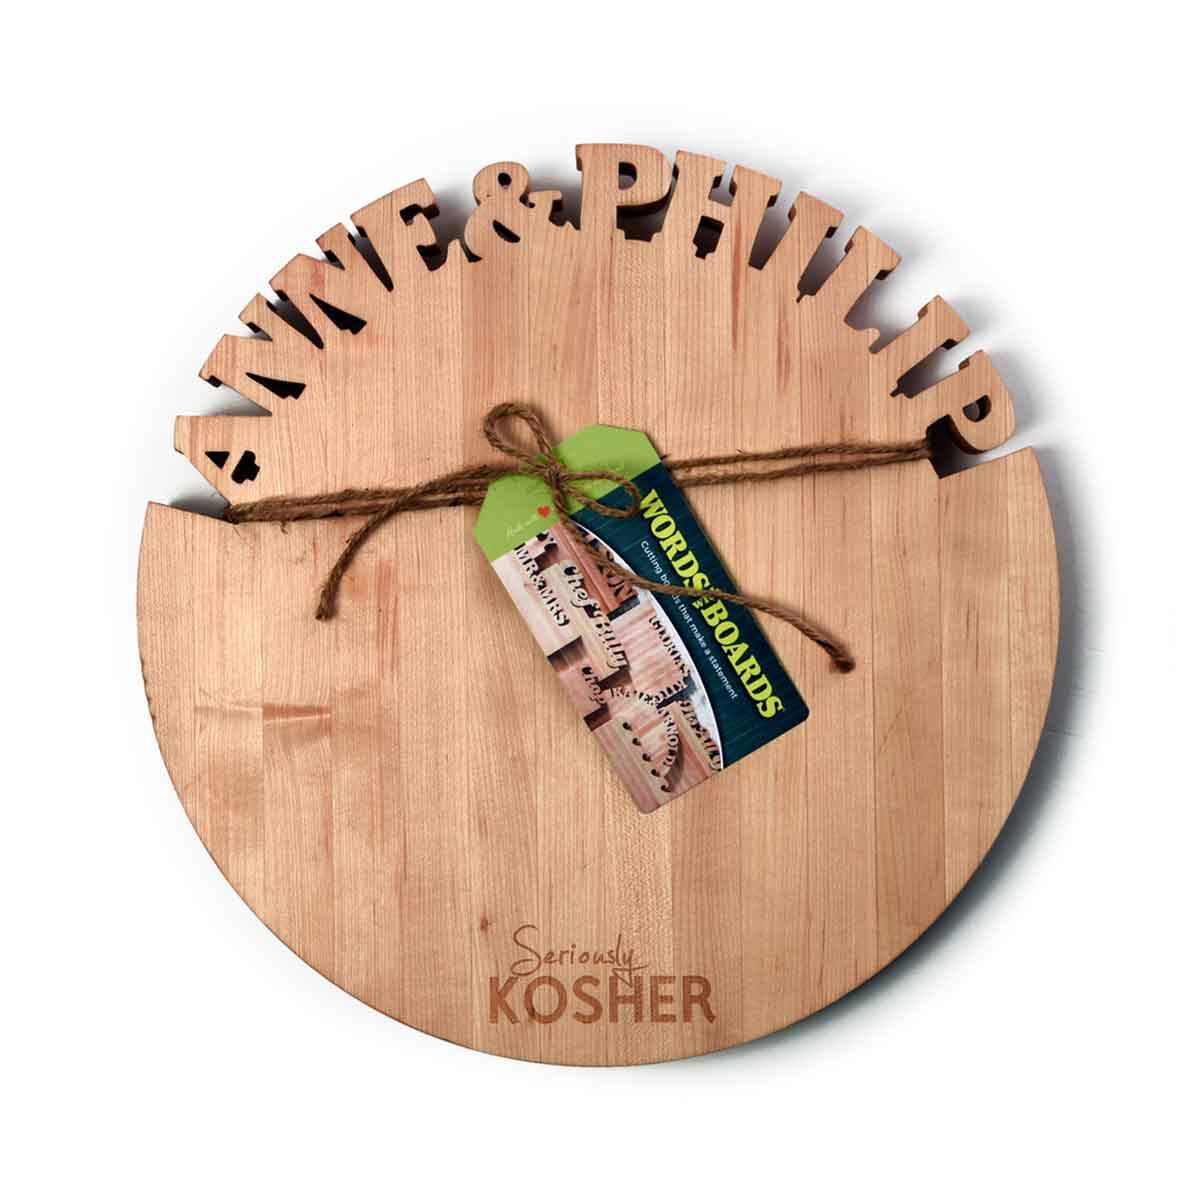 https://wordswithboards.com/cdn/shop/products/KOSHER_KITCHEN_-_WOOD_CUTTING_BOARD_-_www.wordswithboards.com.jpg?v=1528683203